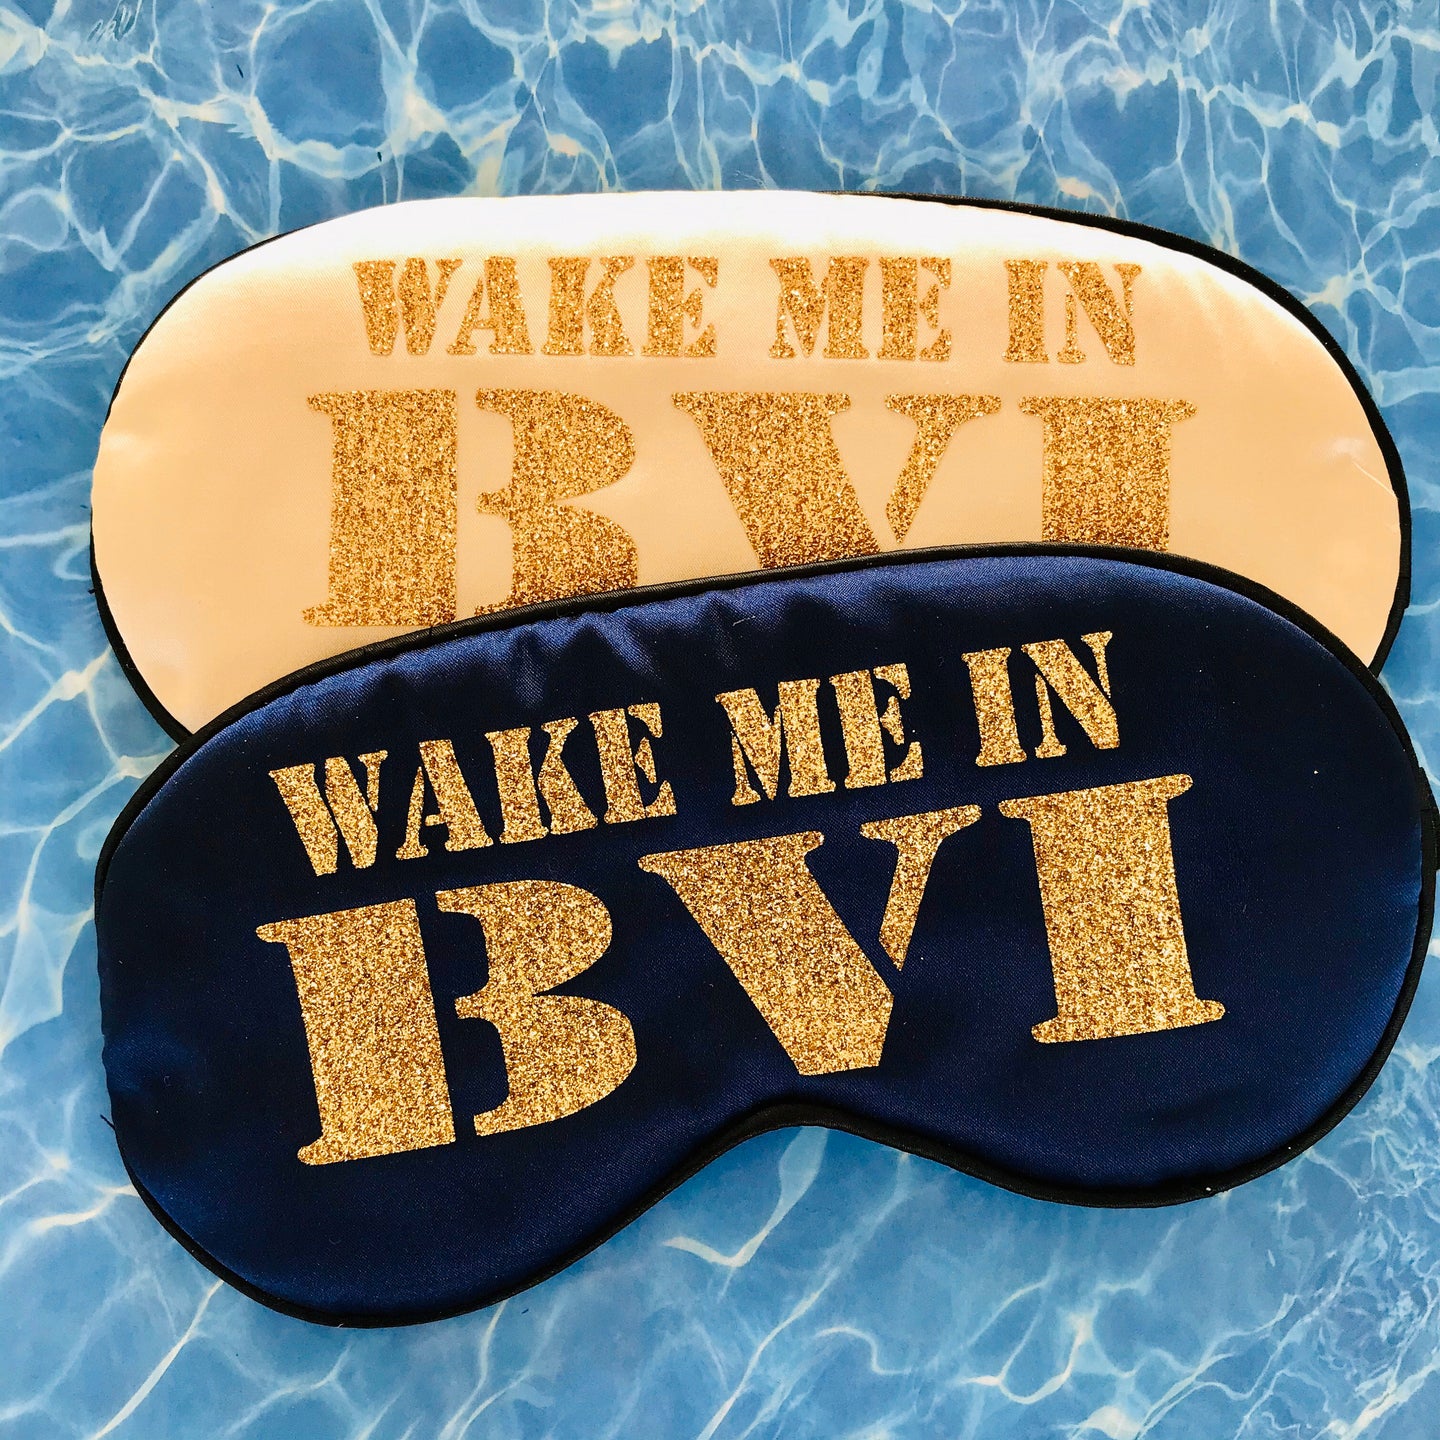 Glitter BVI Sleep Mask! Great Bachelorette or Birthday party FAVORS. Perfect addition to the hangover bags!